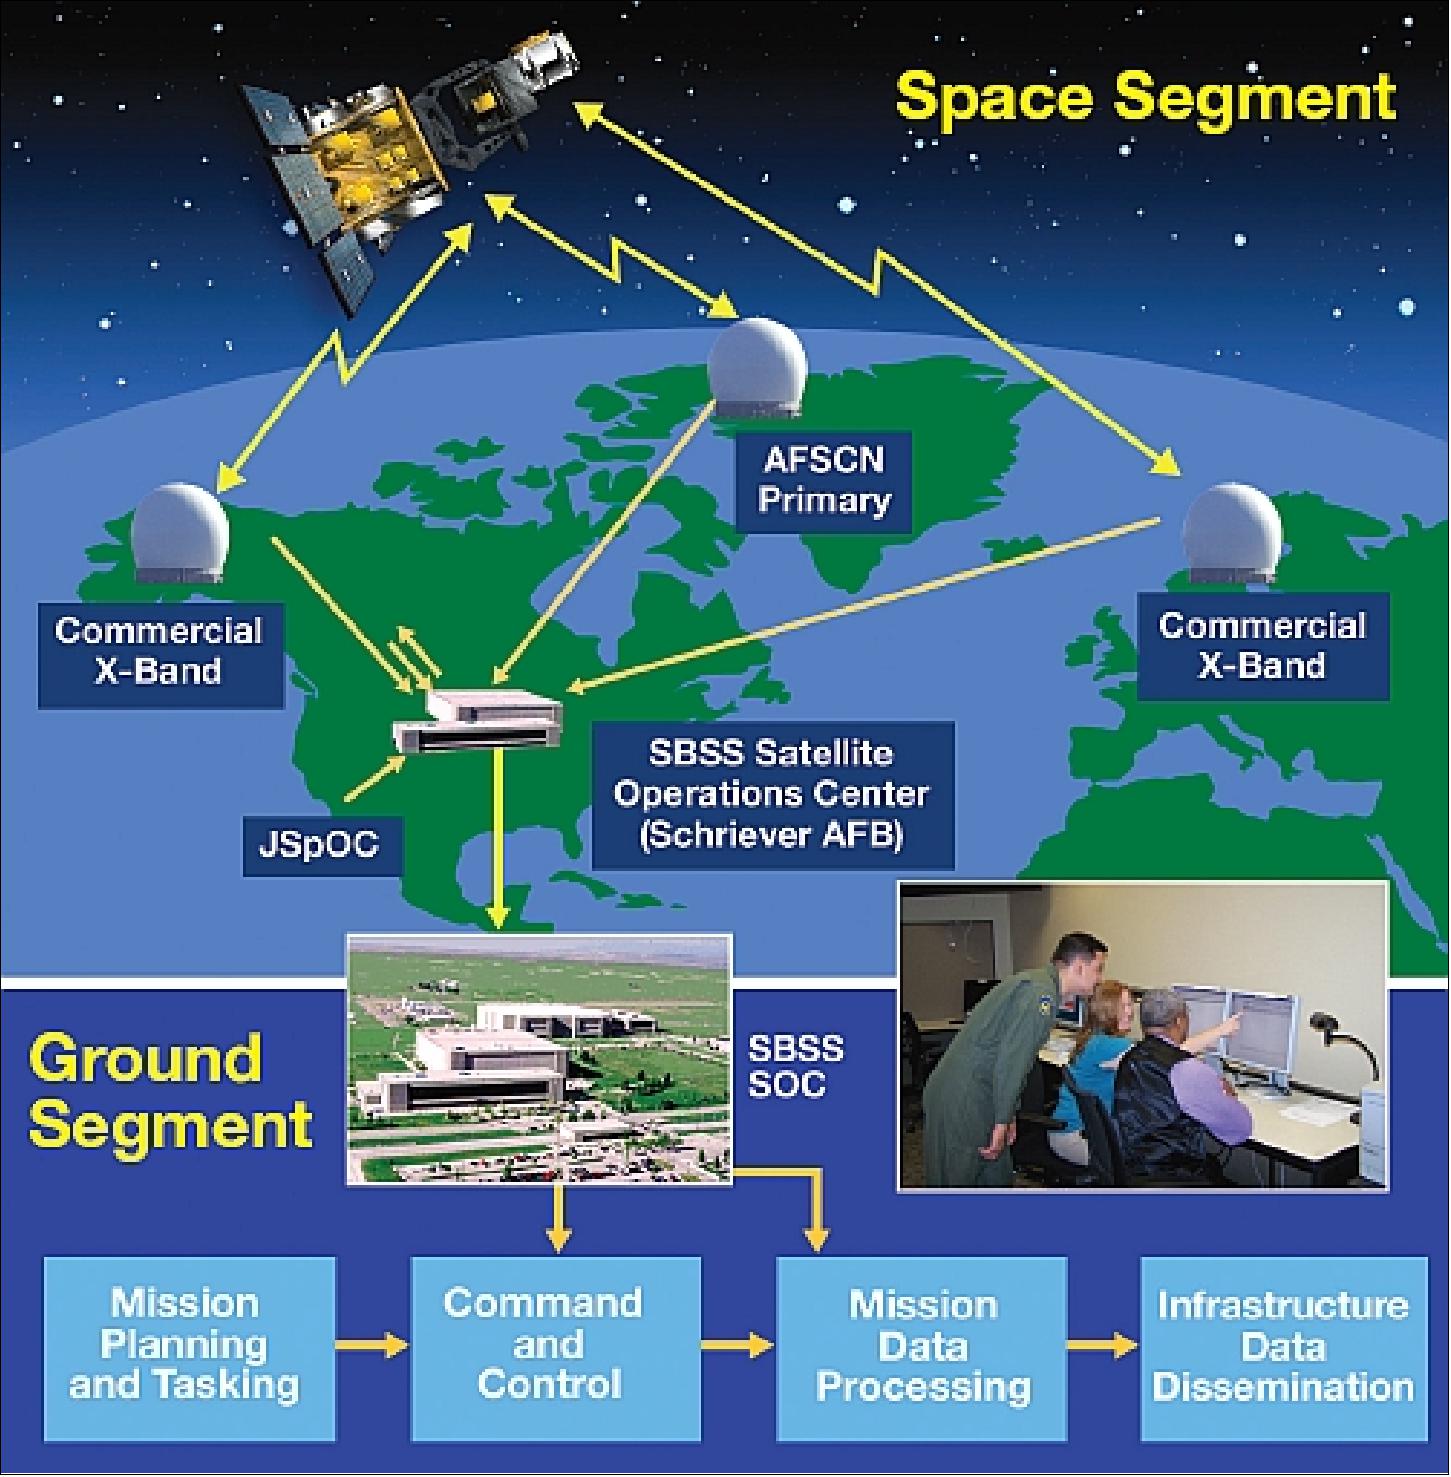 Figure 12: Alternate view of the overall SBSS-1 system (image credit: AFSPC, Ref. 41)